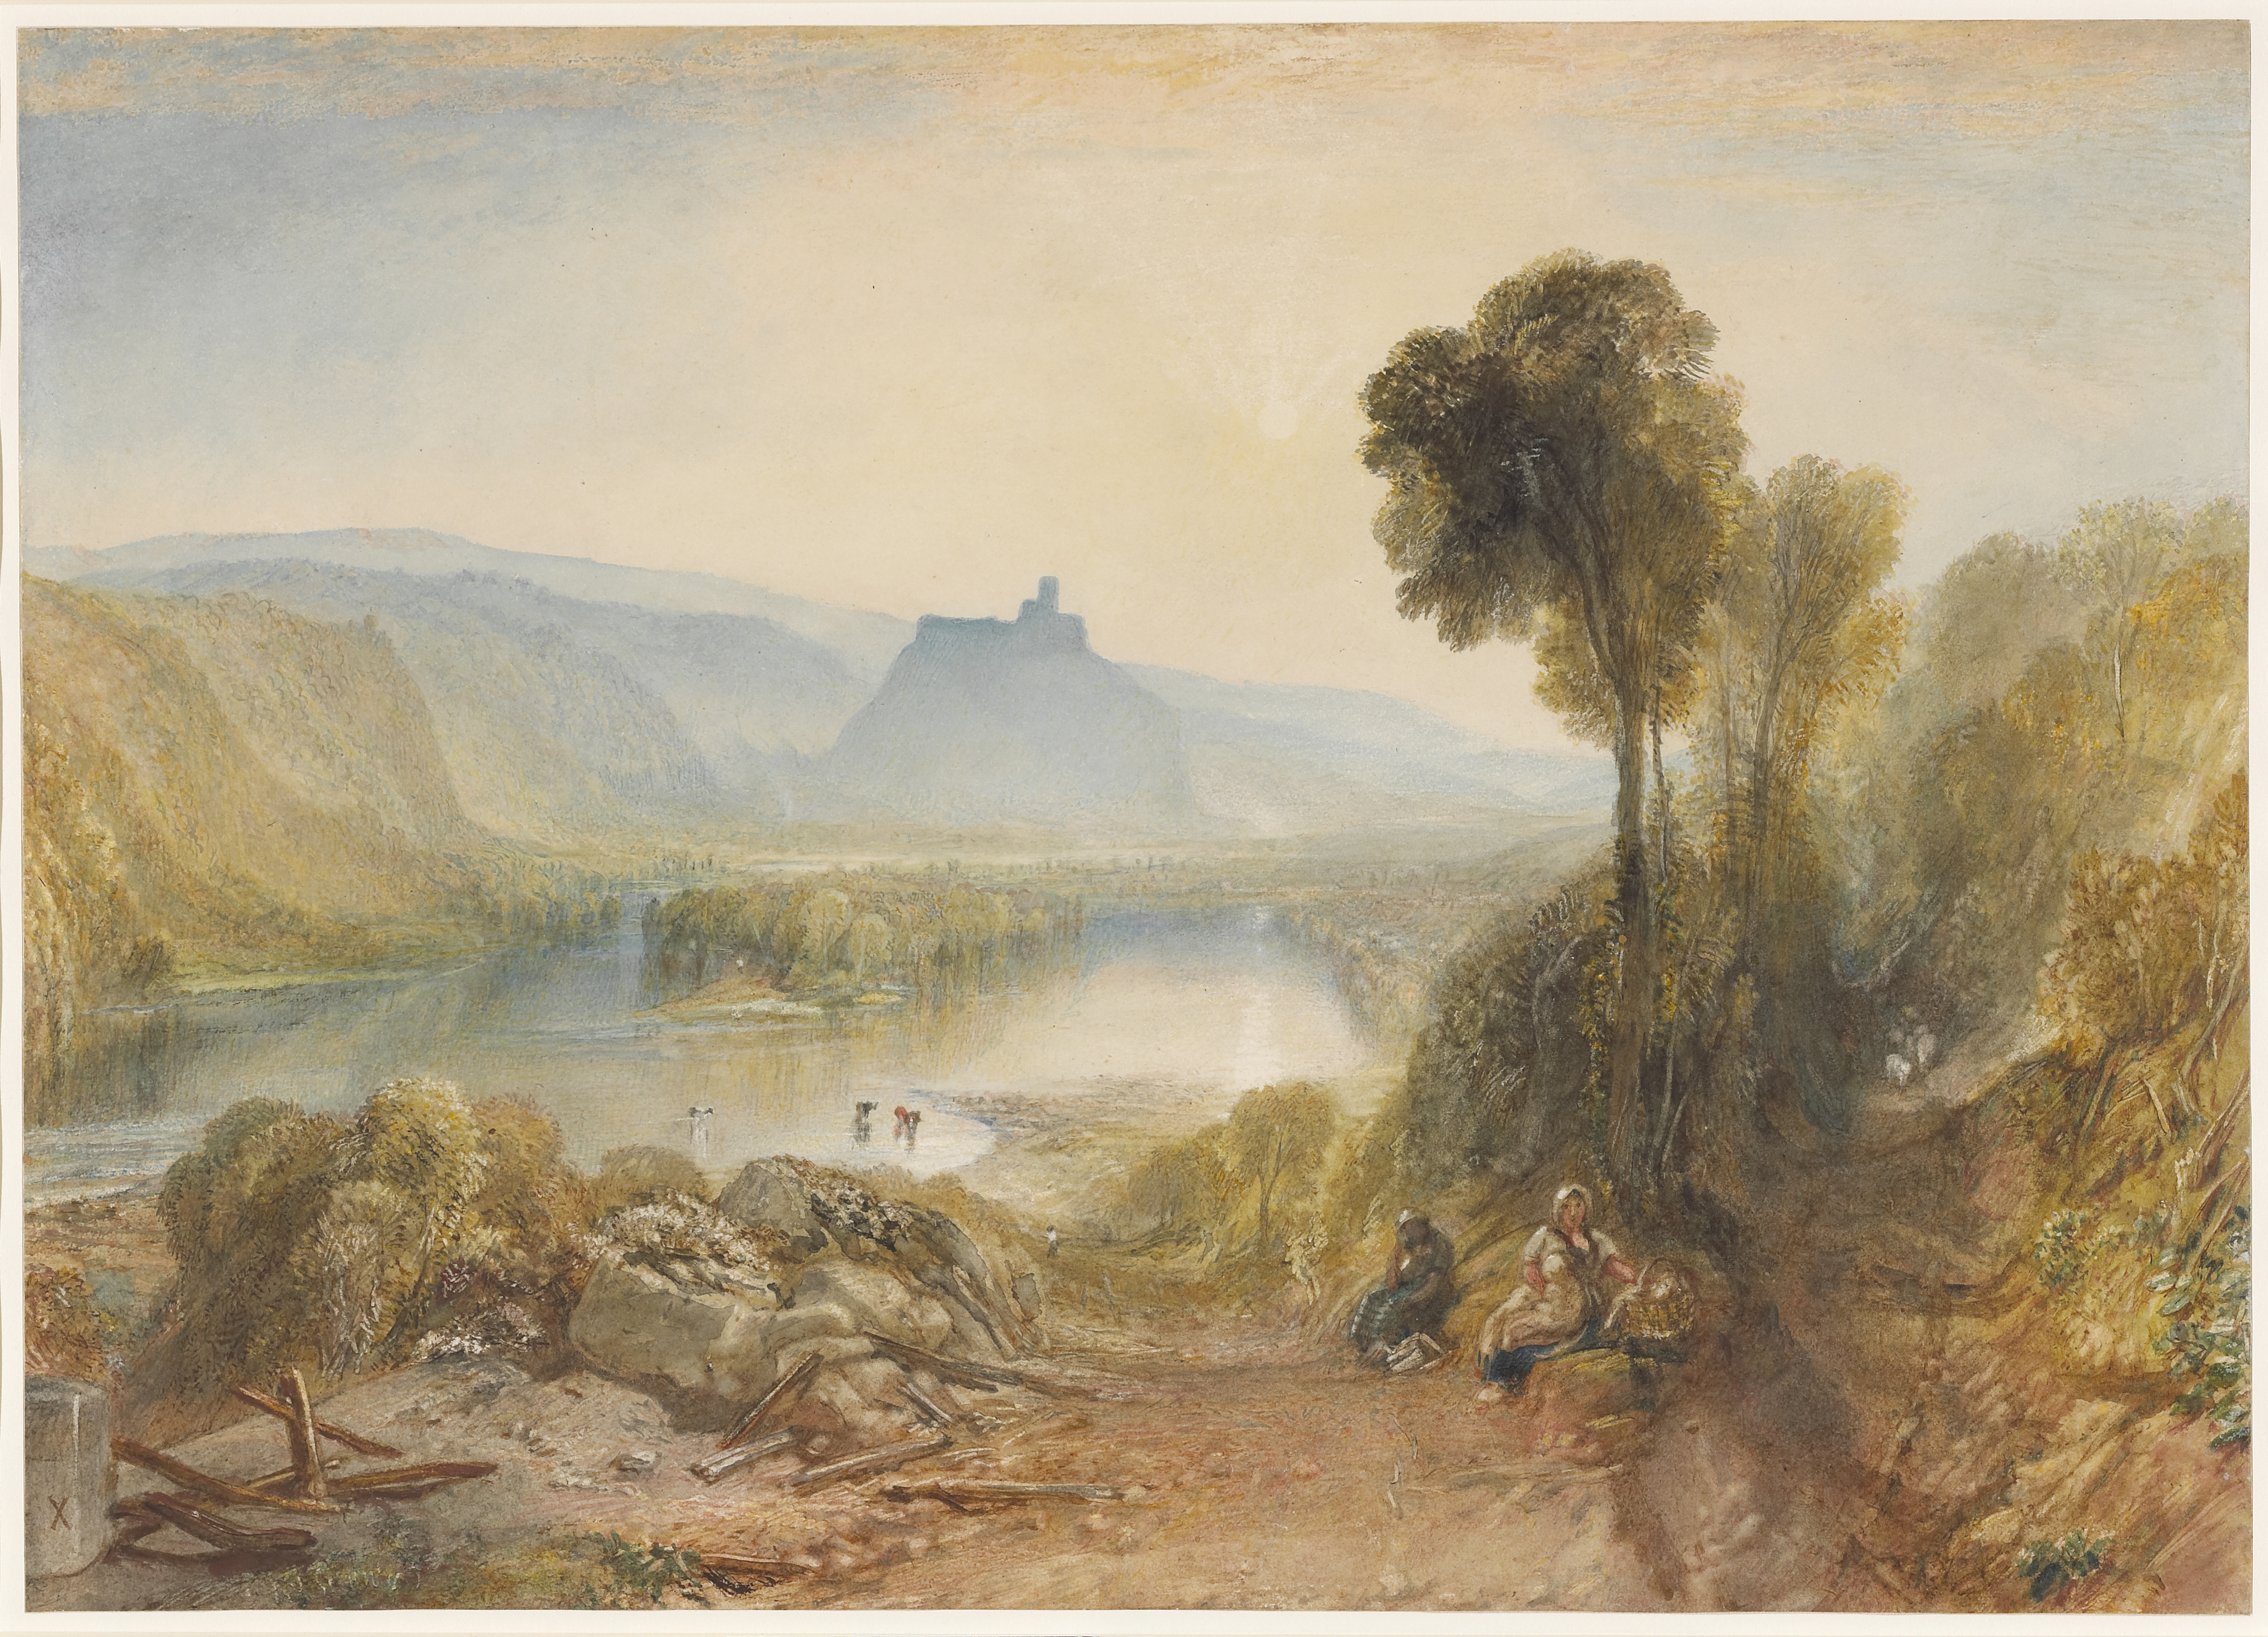 Prudhoe-Castle-Northumberland-by-Joseph-Mallord-William-Turner-is-a-bright-example-of-unarguable-artistic-value-behind-the-NFT-collection-from-The-British-Museum.